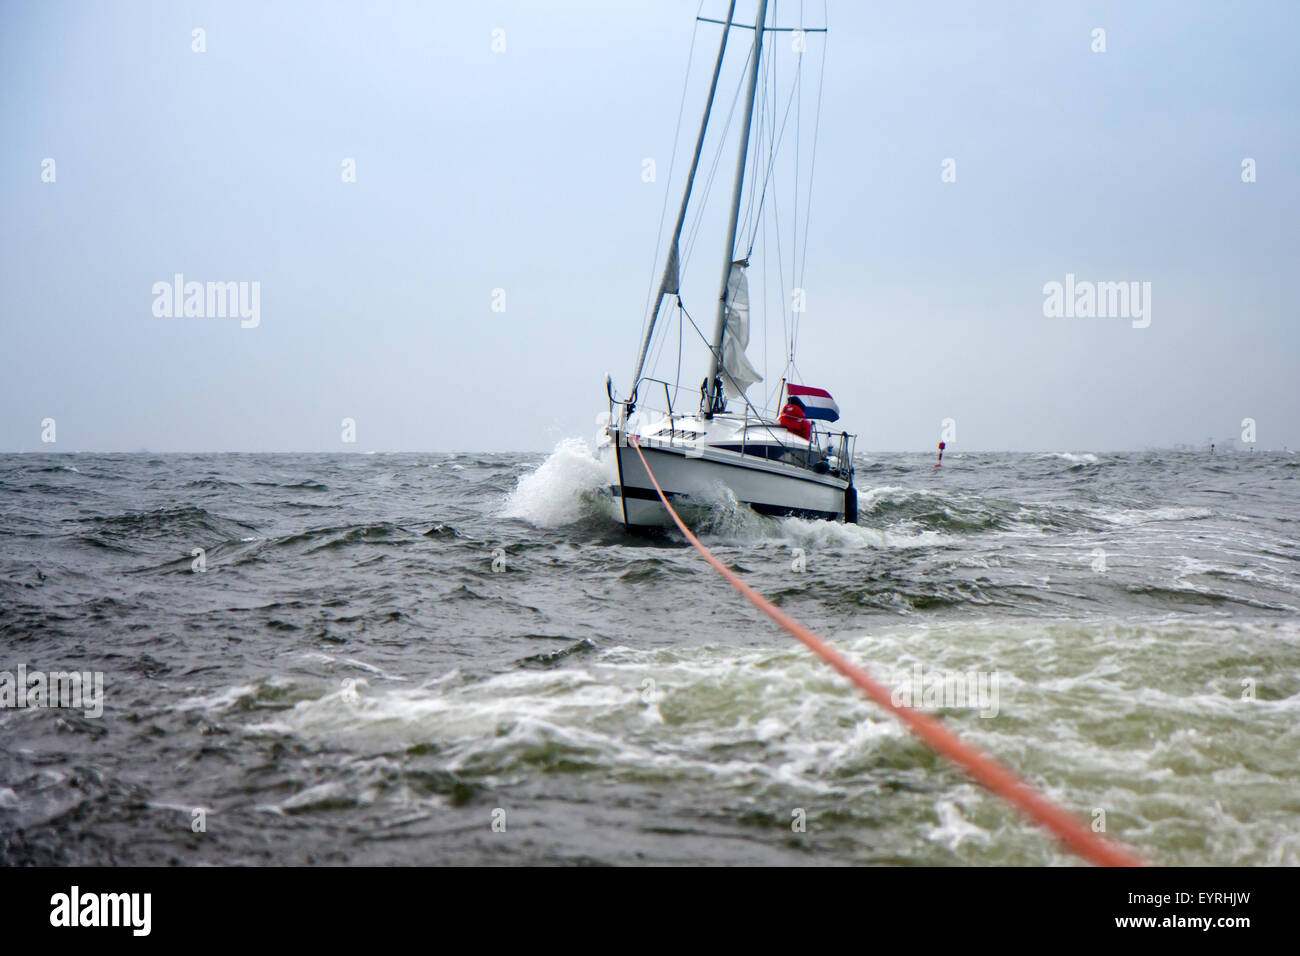 Dutch Yacht in misery be on tow to a safe harbor Stock Photo